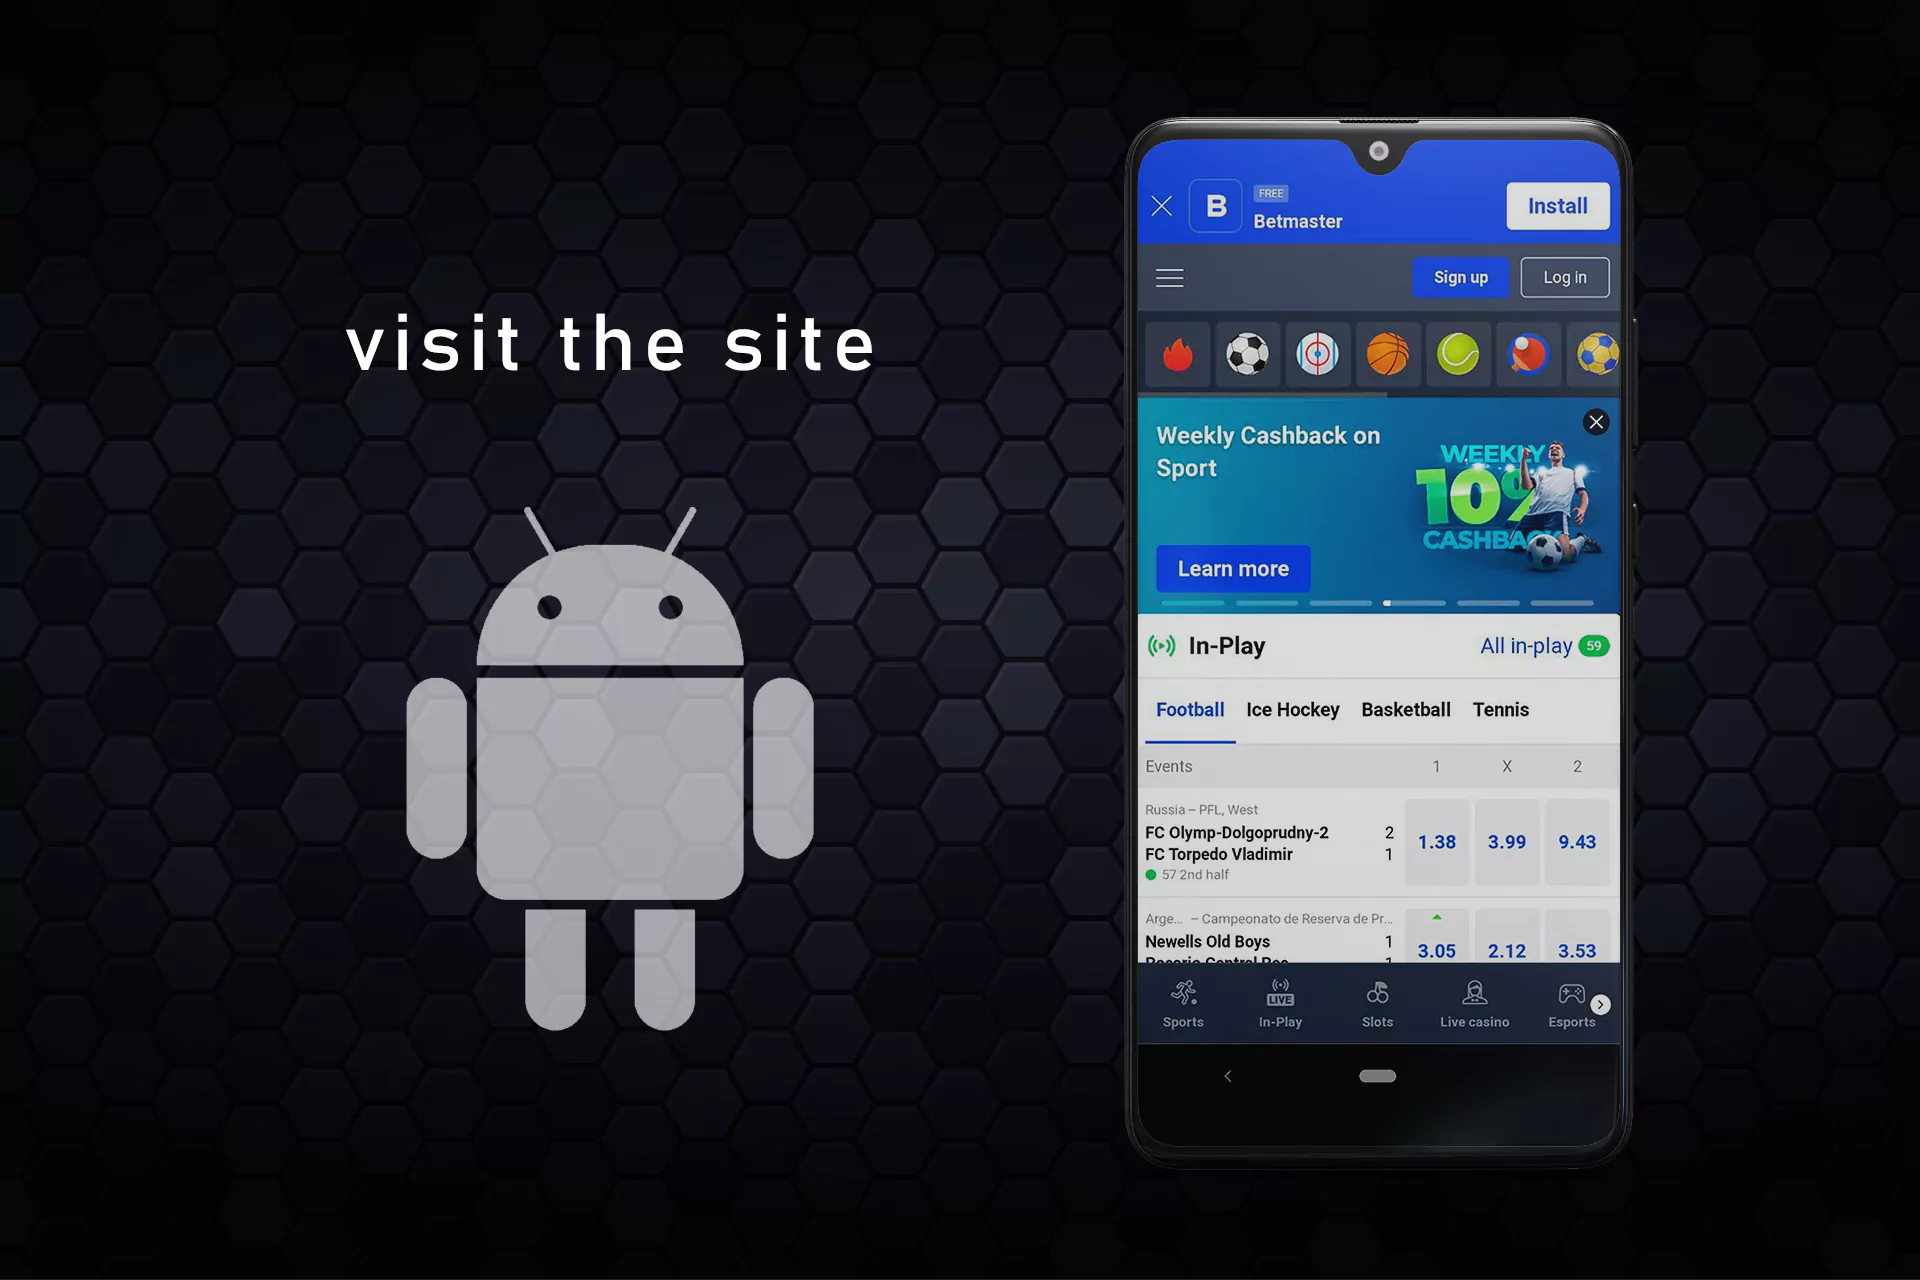 Open the mobile browser and go to the site of Betmaster.